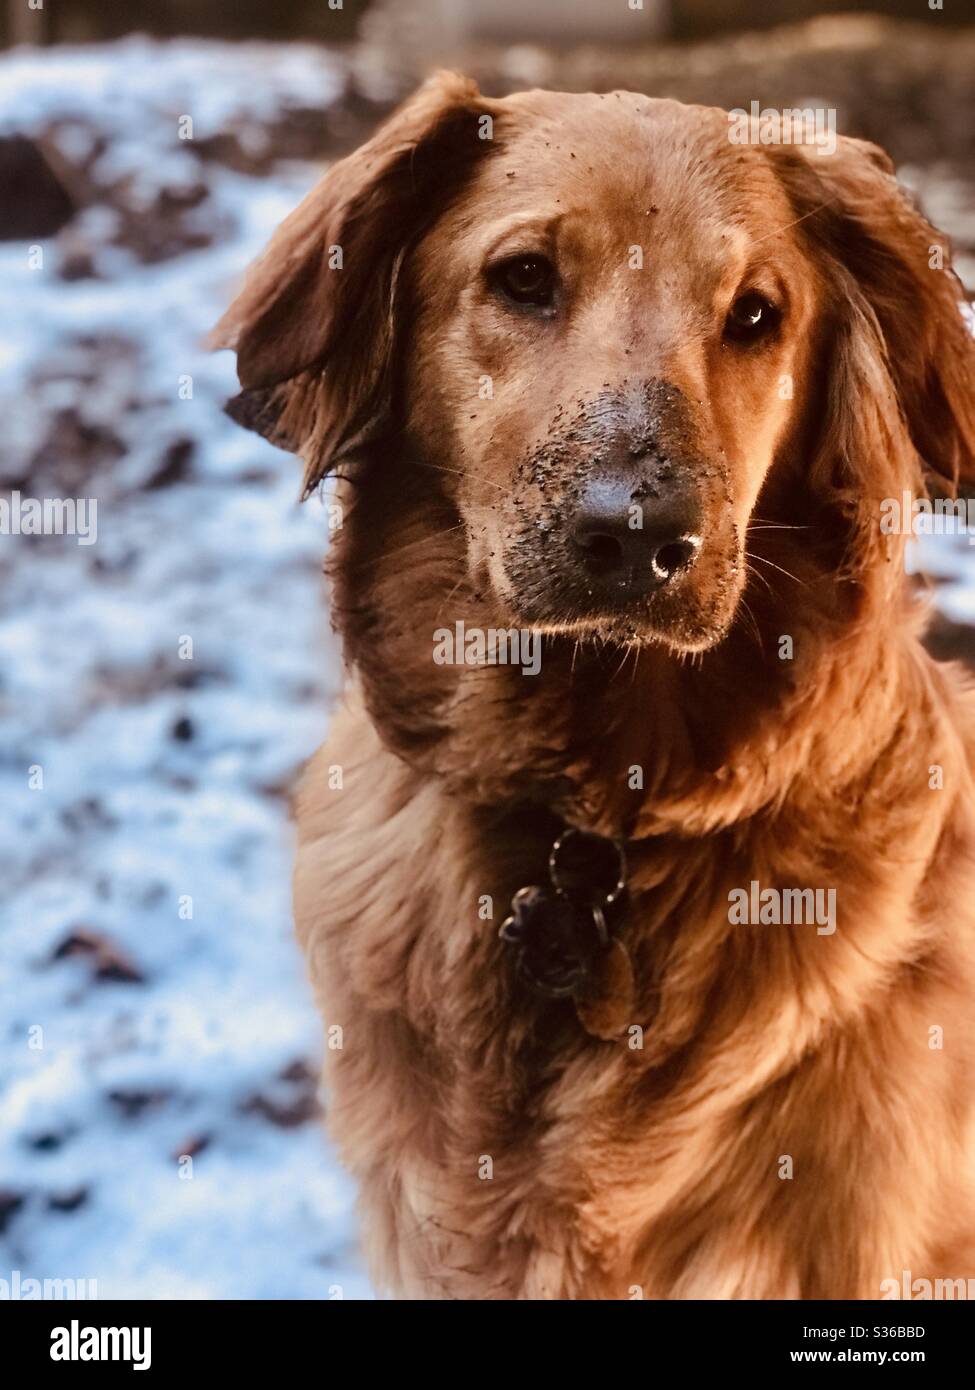 A golden retriever dog sitting outside in the snow with mud on her nose. Stock Photo